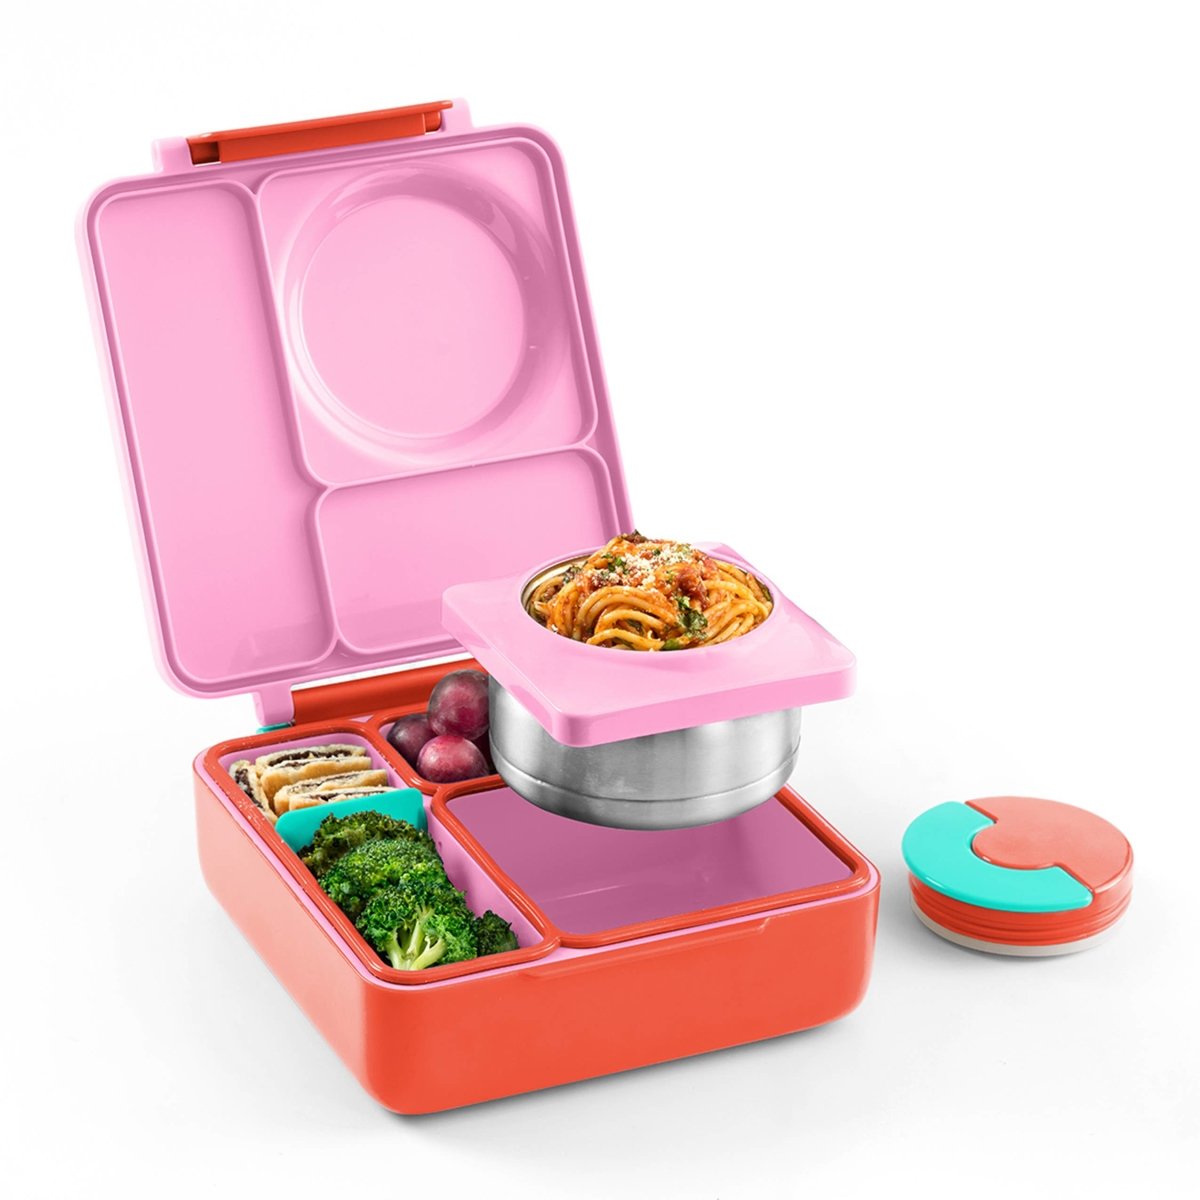 The Dearest Grey Silicone Bento Box  Anthropologie Japan - Women's  Clothing, Accessories & Home